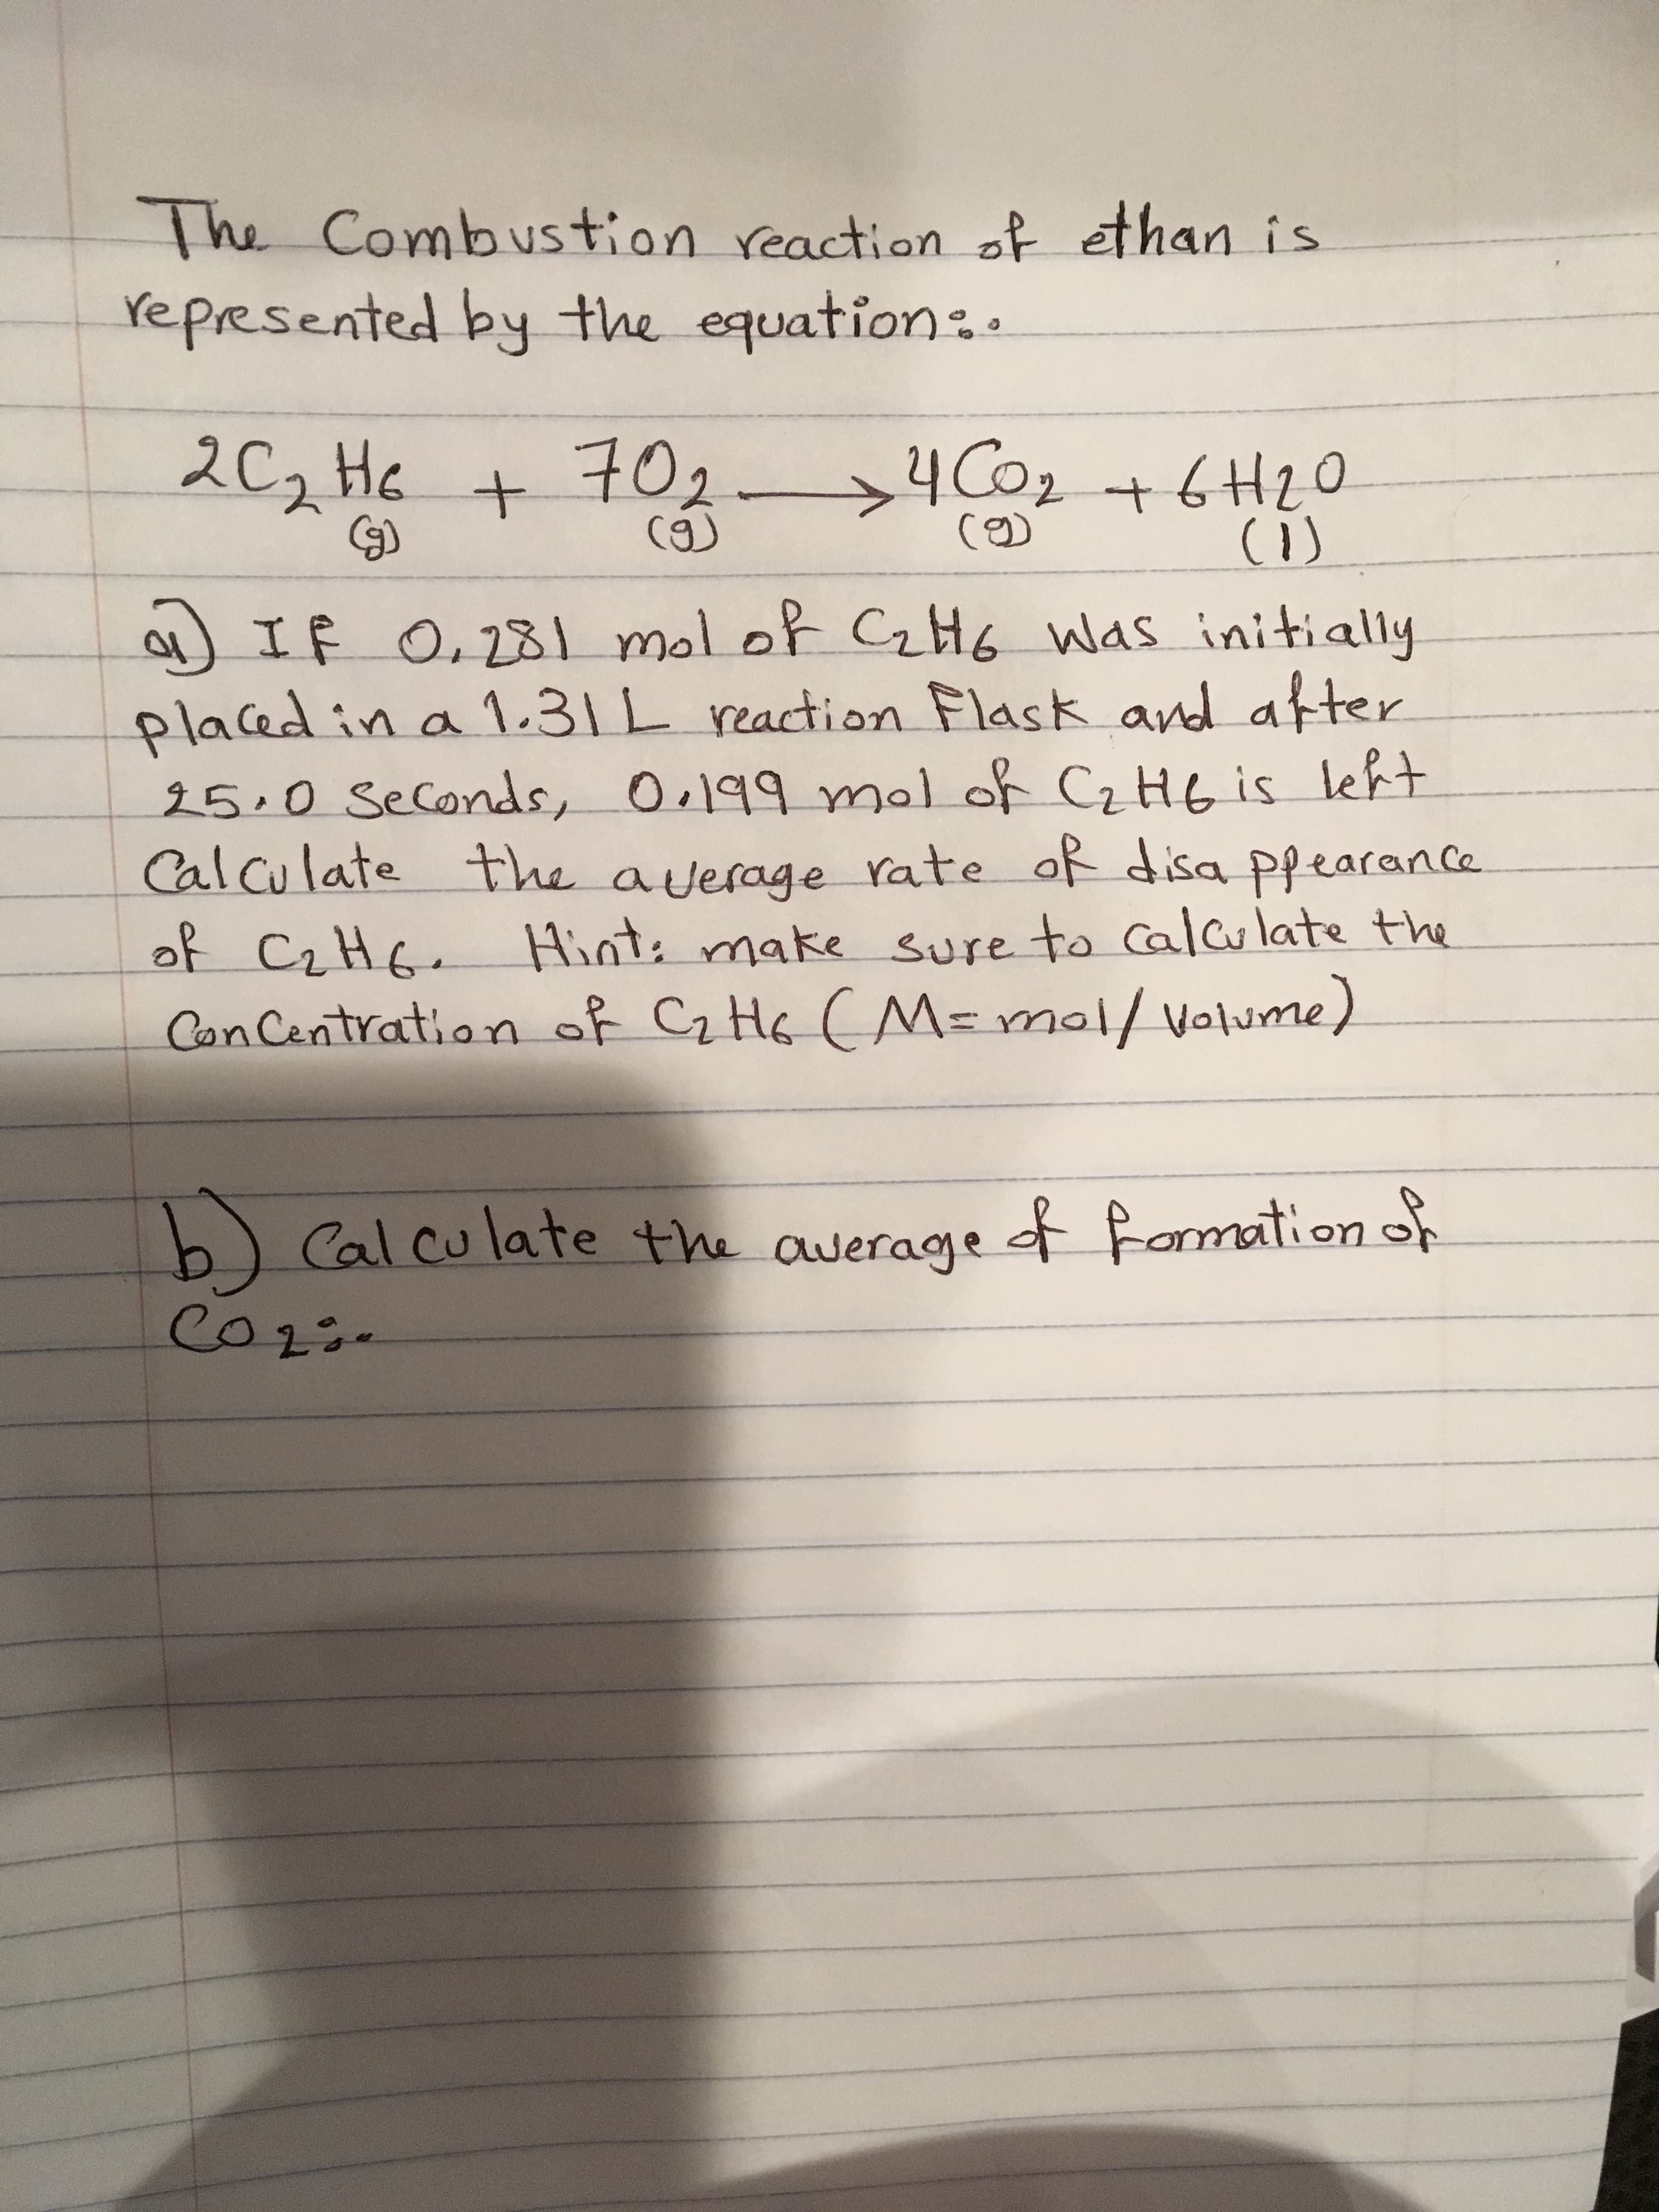 The Combustion reaction of ethan is
Ye Presented by the equation
2C2 He + 10
4 Co2+6H2
C)
IF
Placed in a 1.31 L eaction Flask and atter
250 Seconds, 0.199 mal of CzHe is leht
Calculate
O, 231 mol ot CH6 Was initially
the average Yate af disa Pfearance
o CiHe Hint: make sure to Cal late the
Can Centratian f CiHeCM=mal/volume)
Cal cu late the awerage armation
Co1
